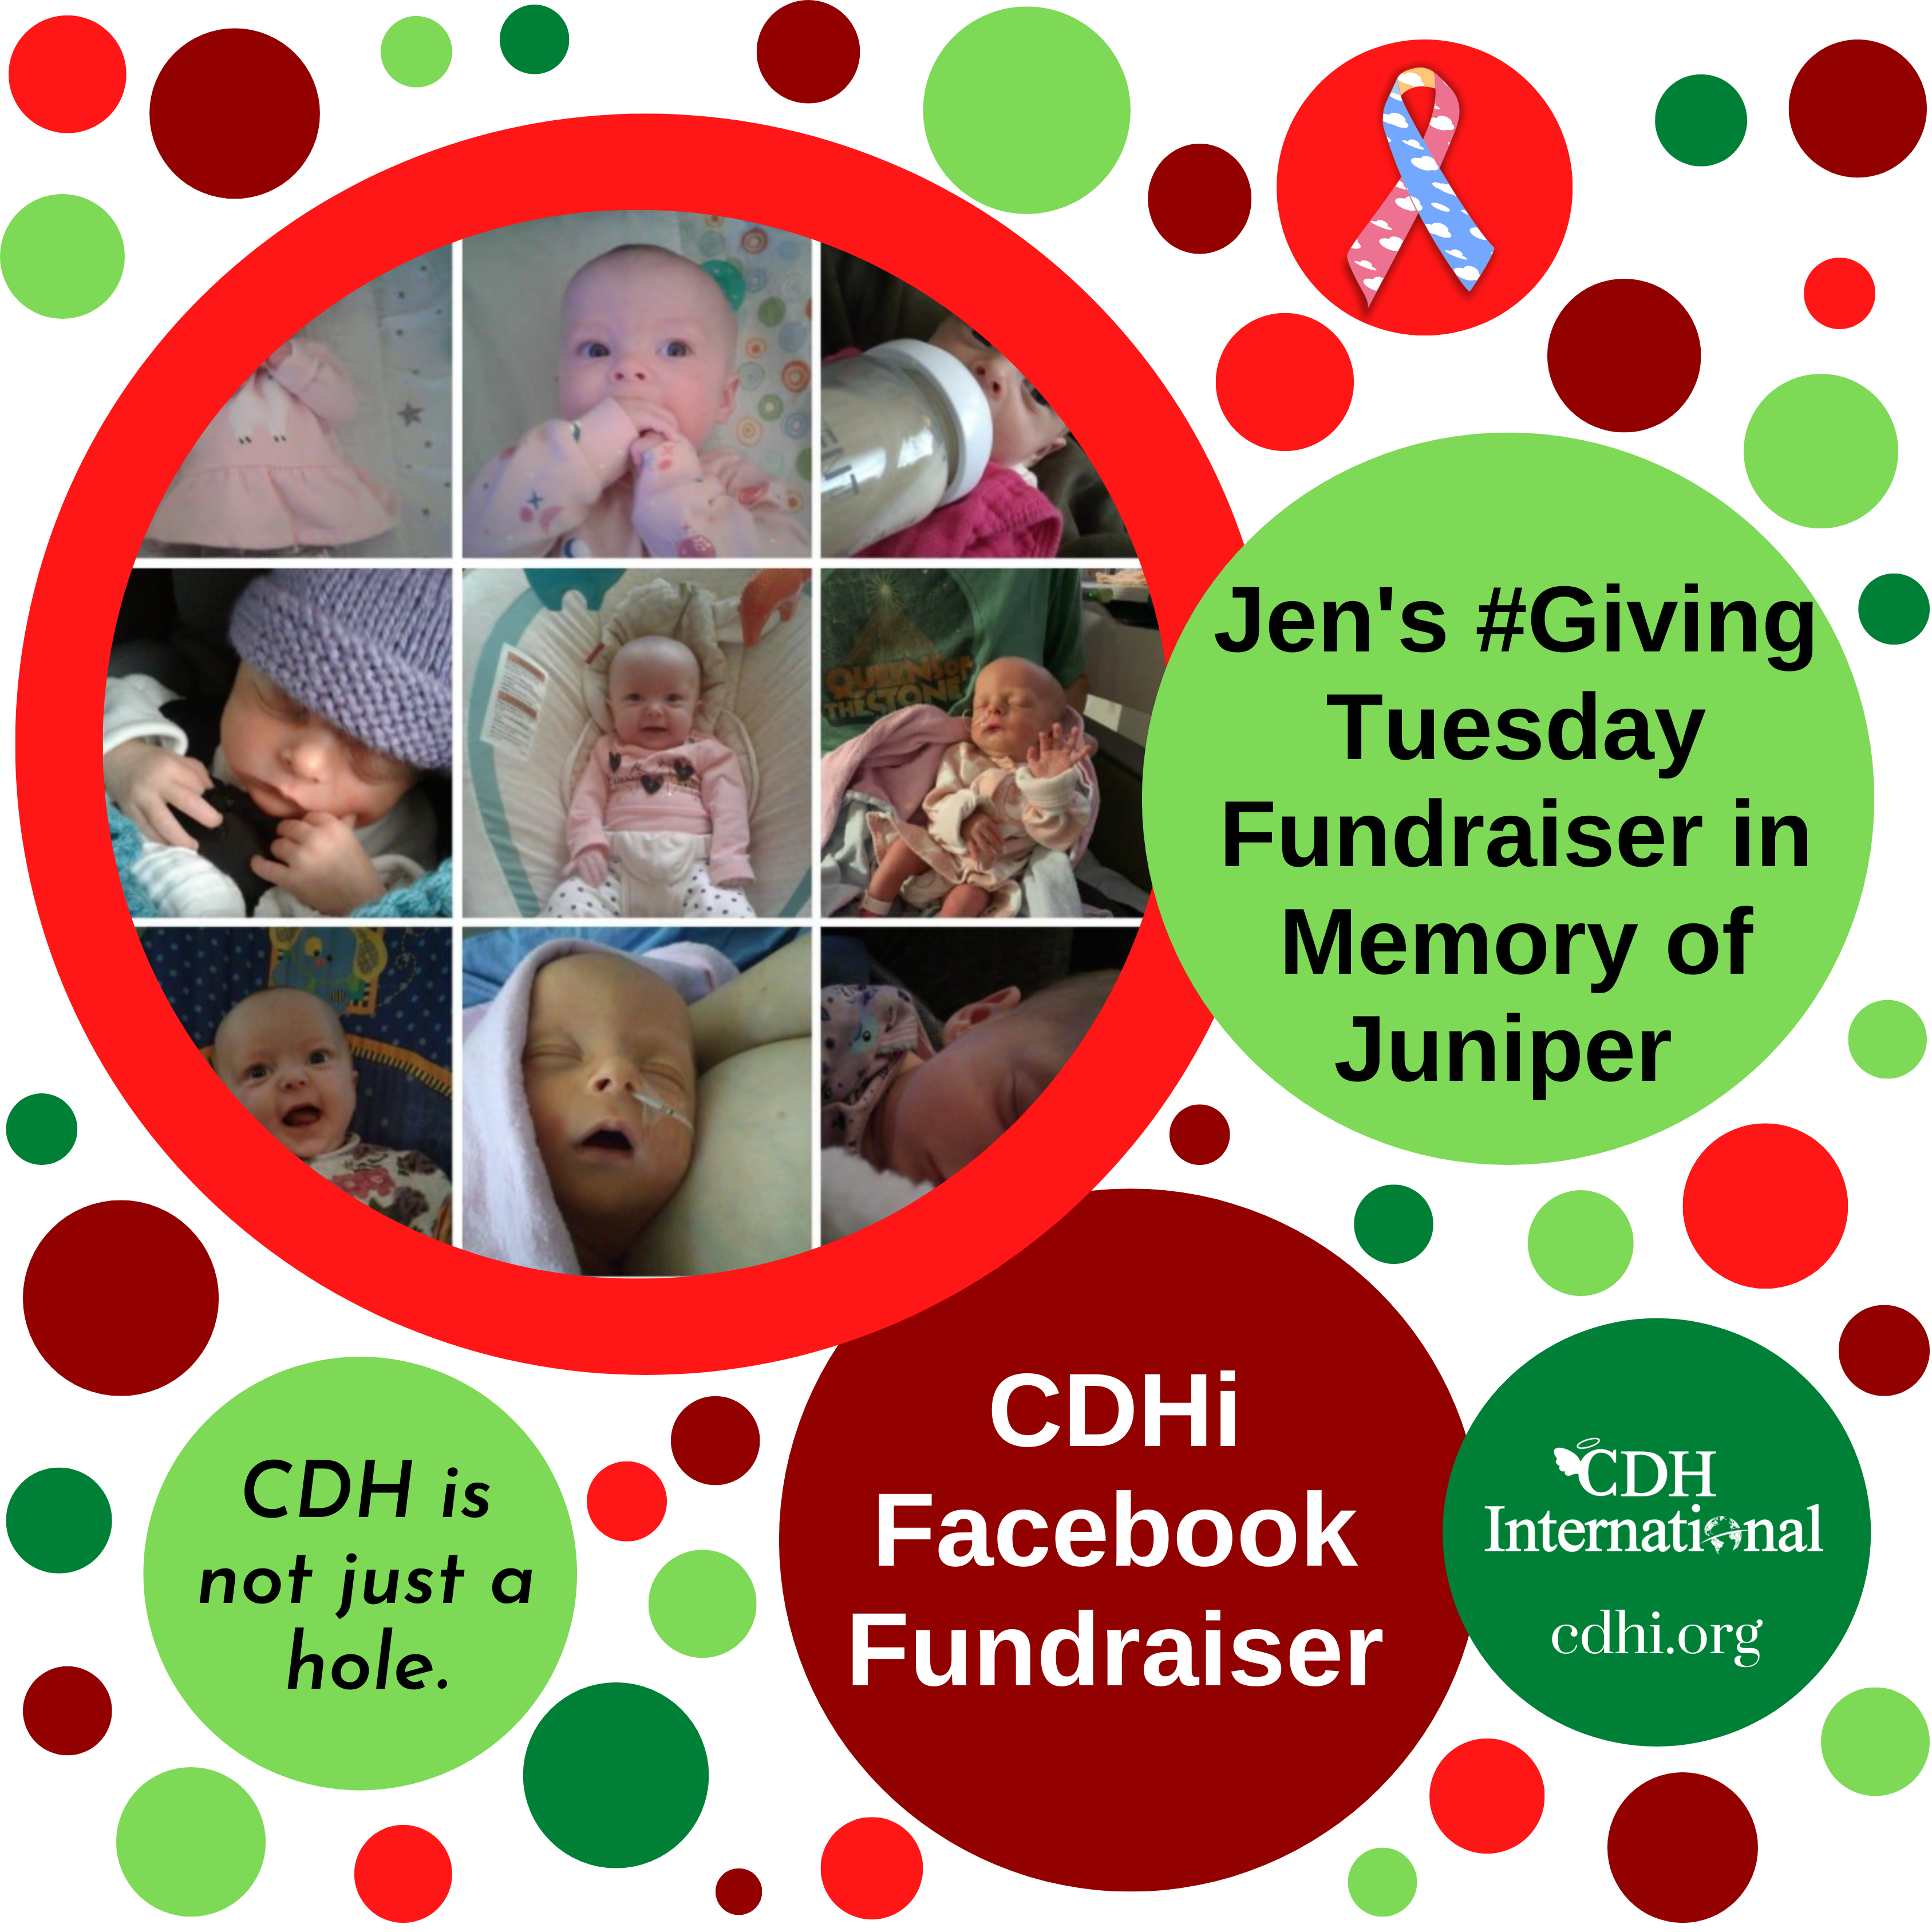 Jessica’s GivingTuesday fundraiser for CDHi in memory of Tristen